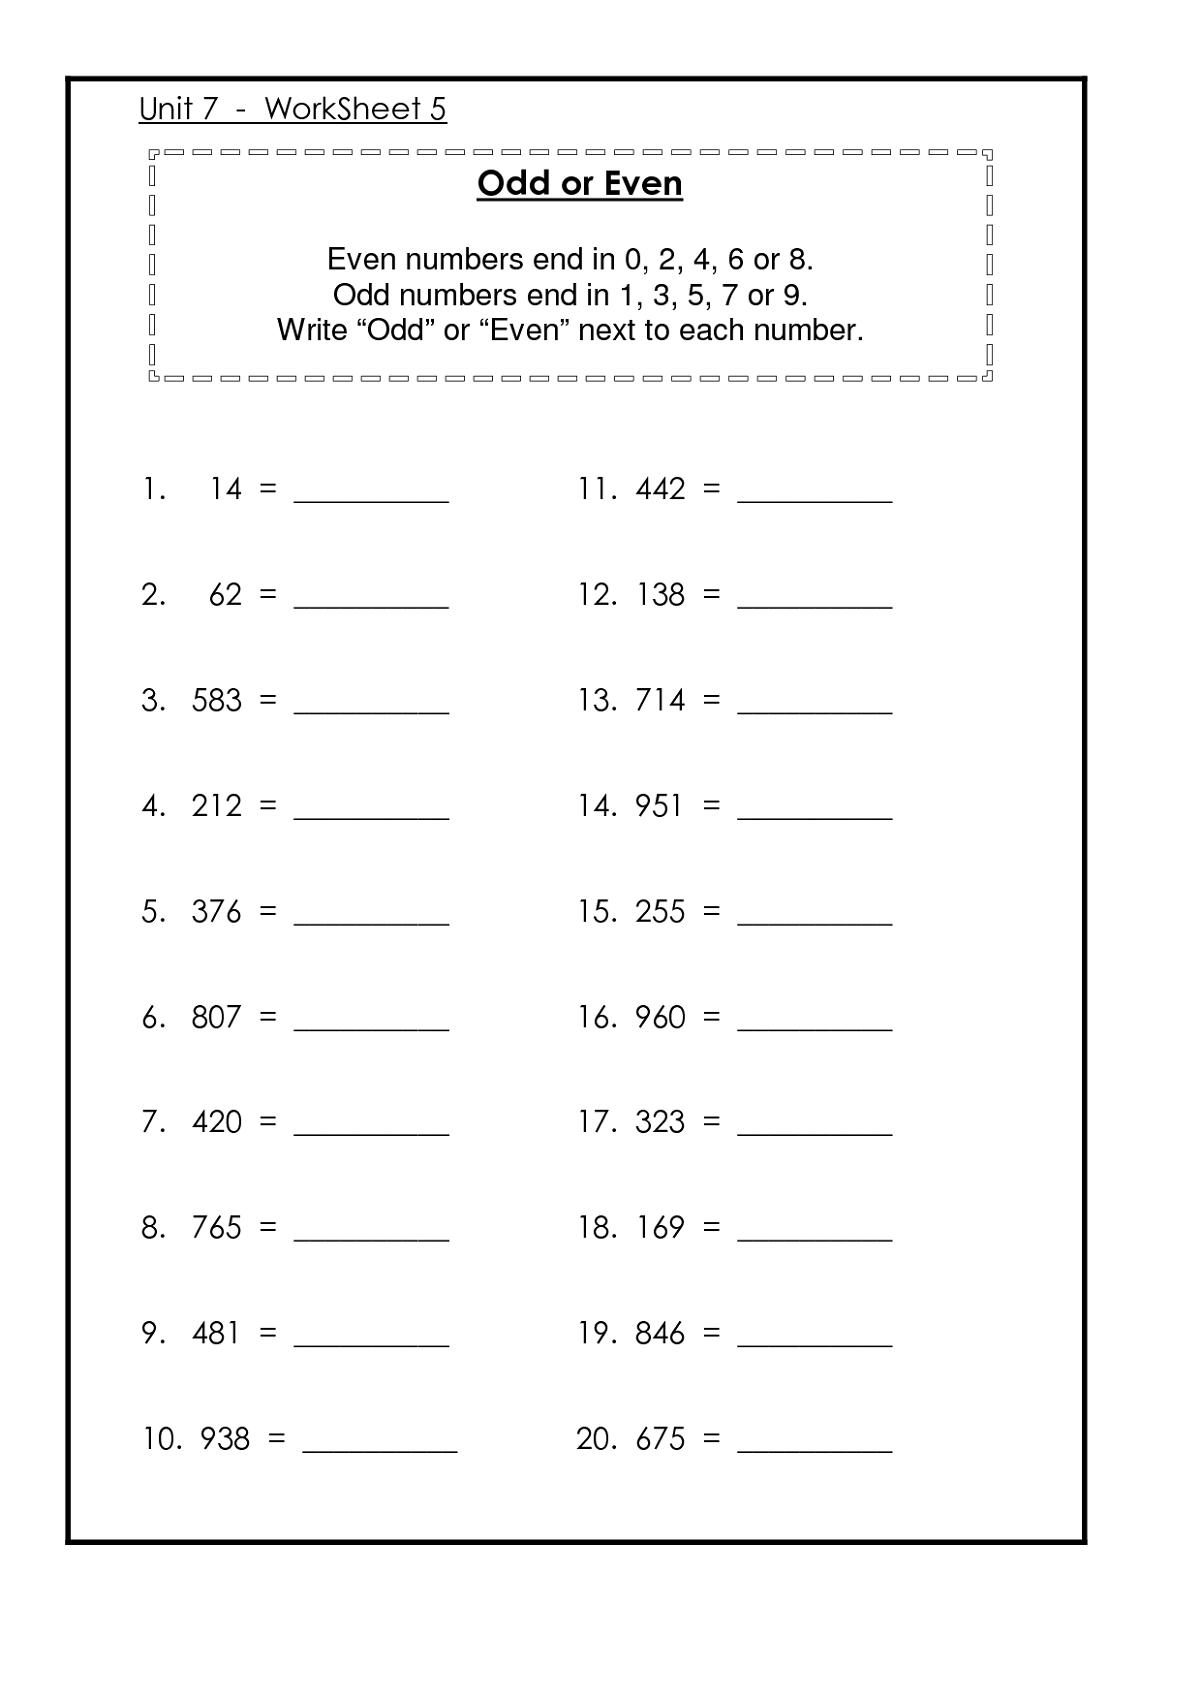 odd and even worksheets free